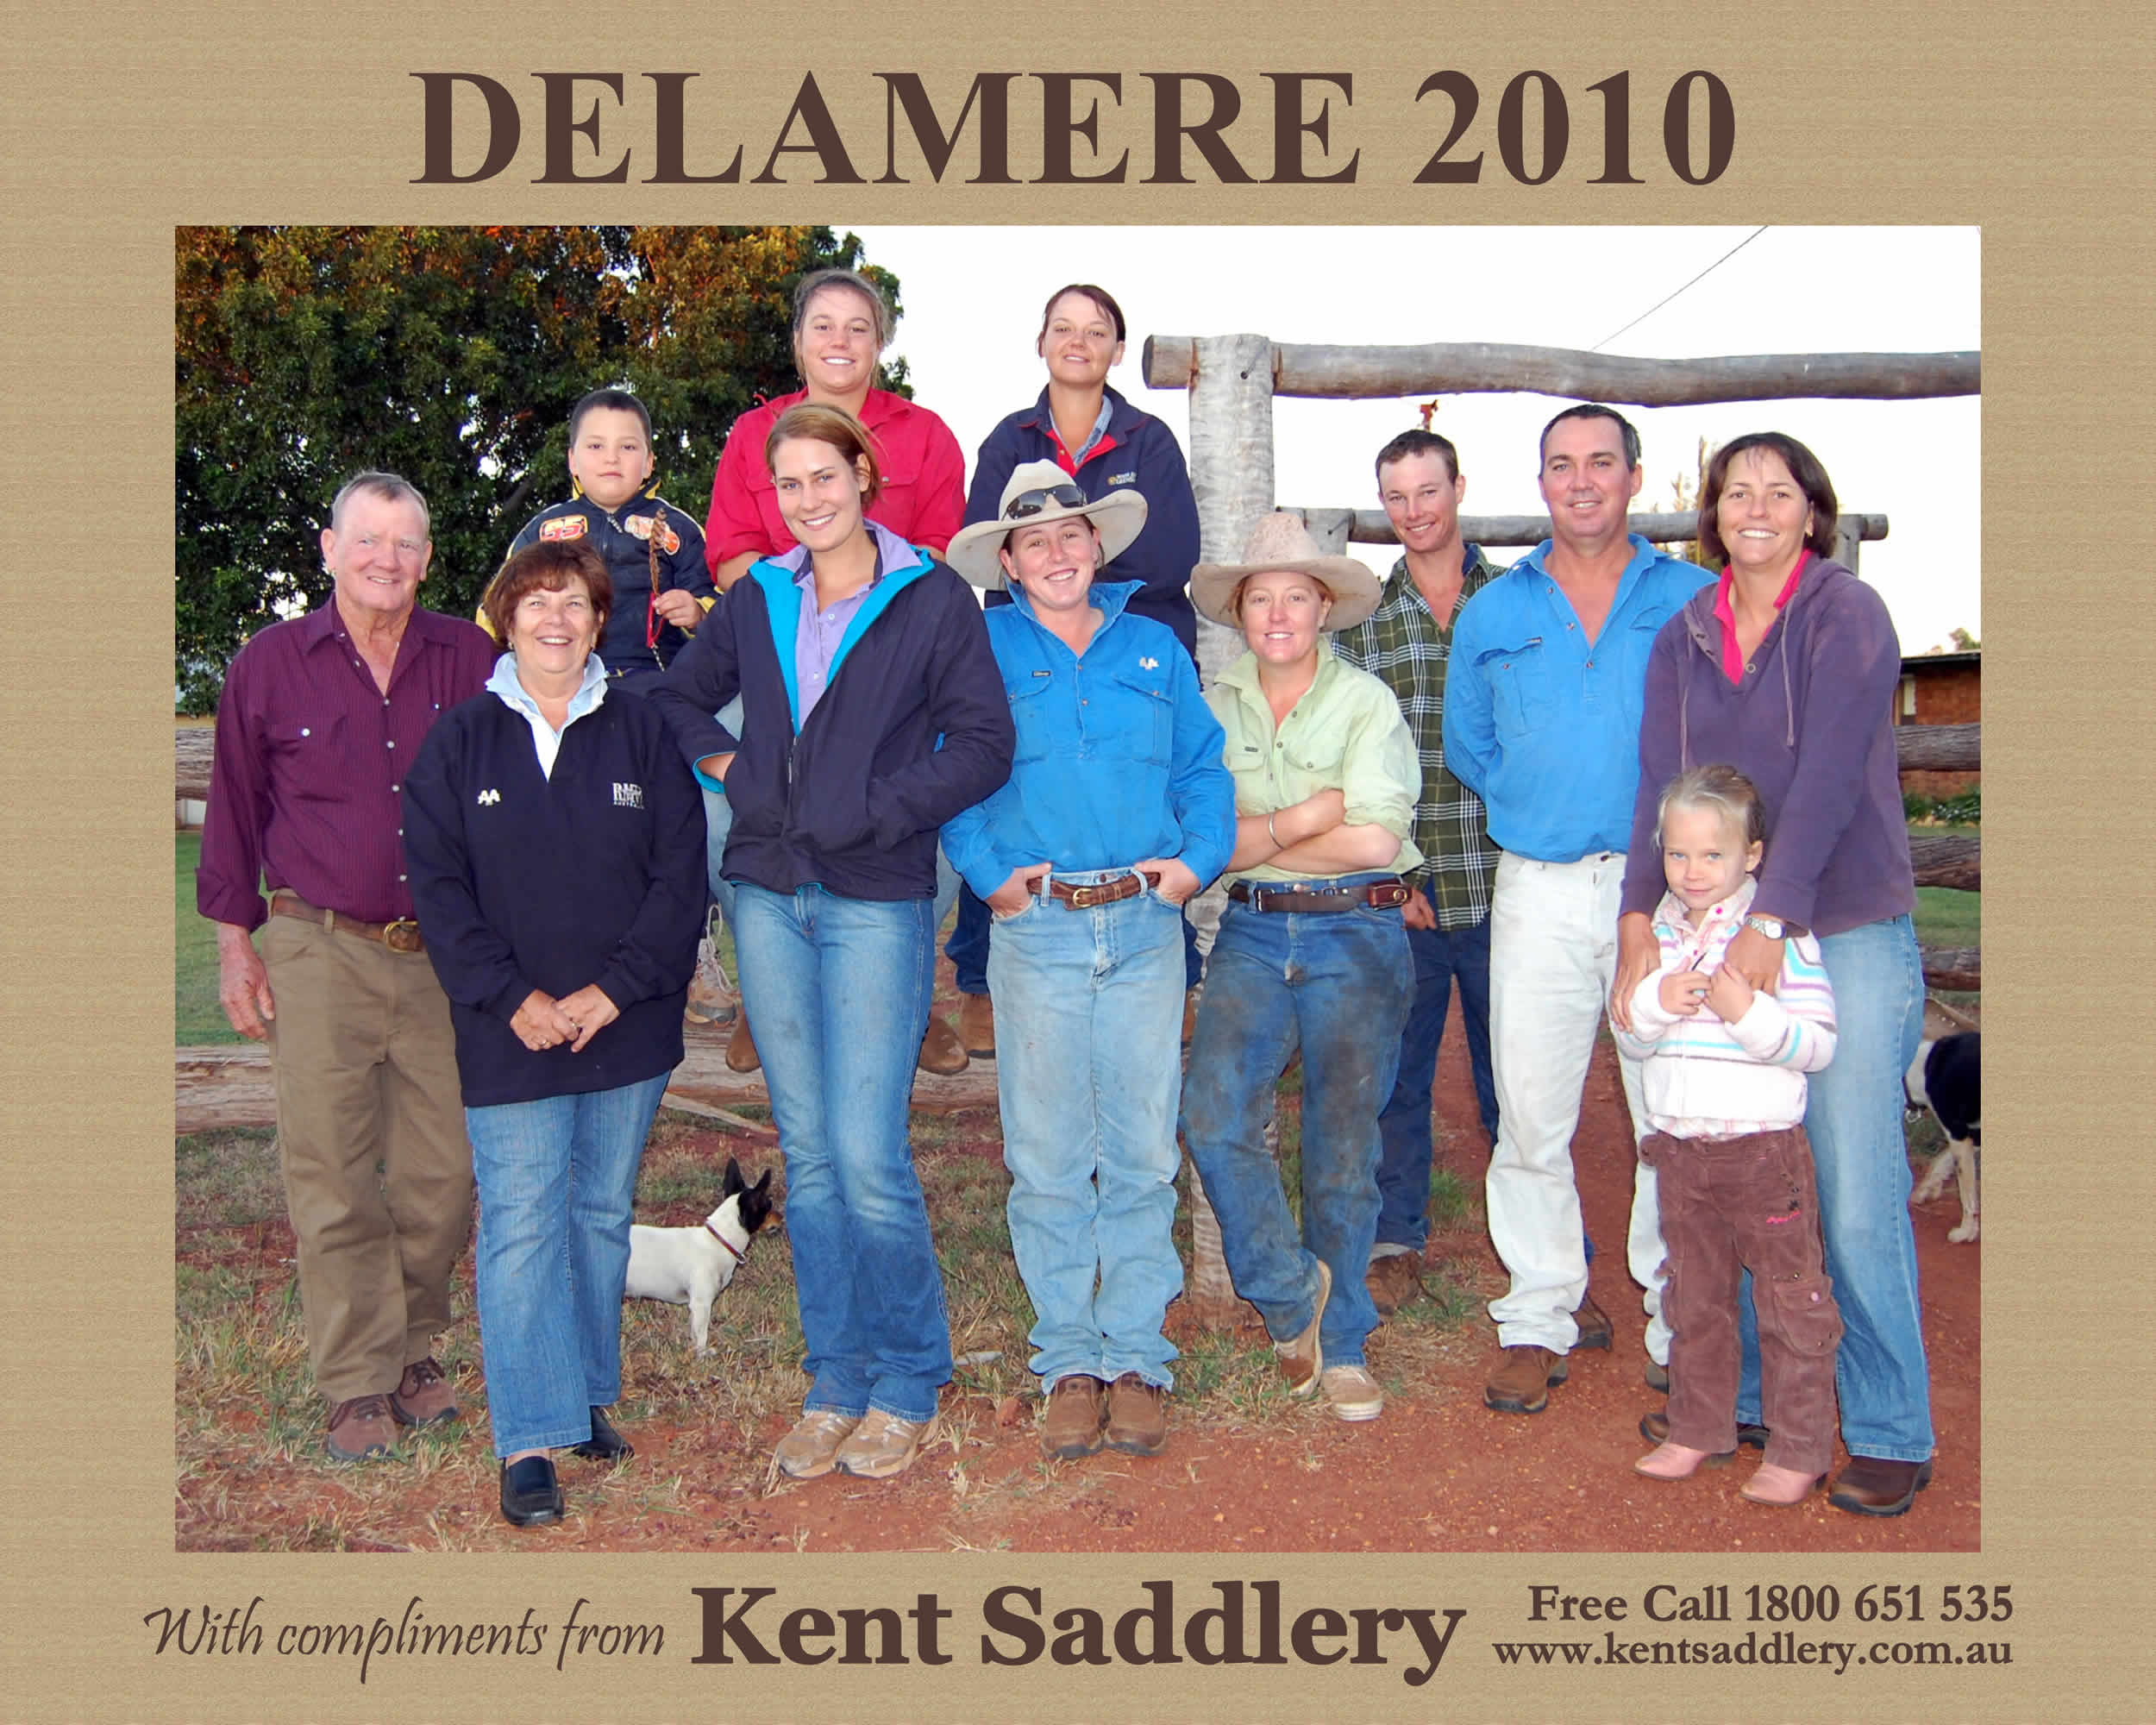 Northern Territory - Delamere 24